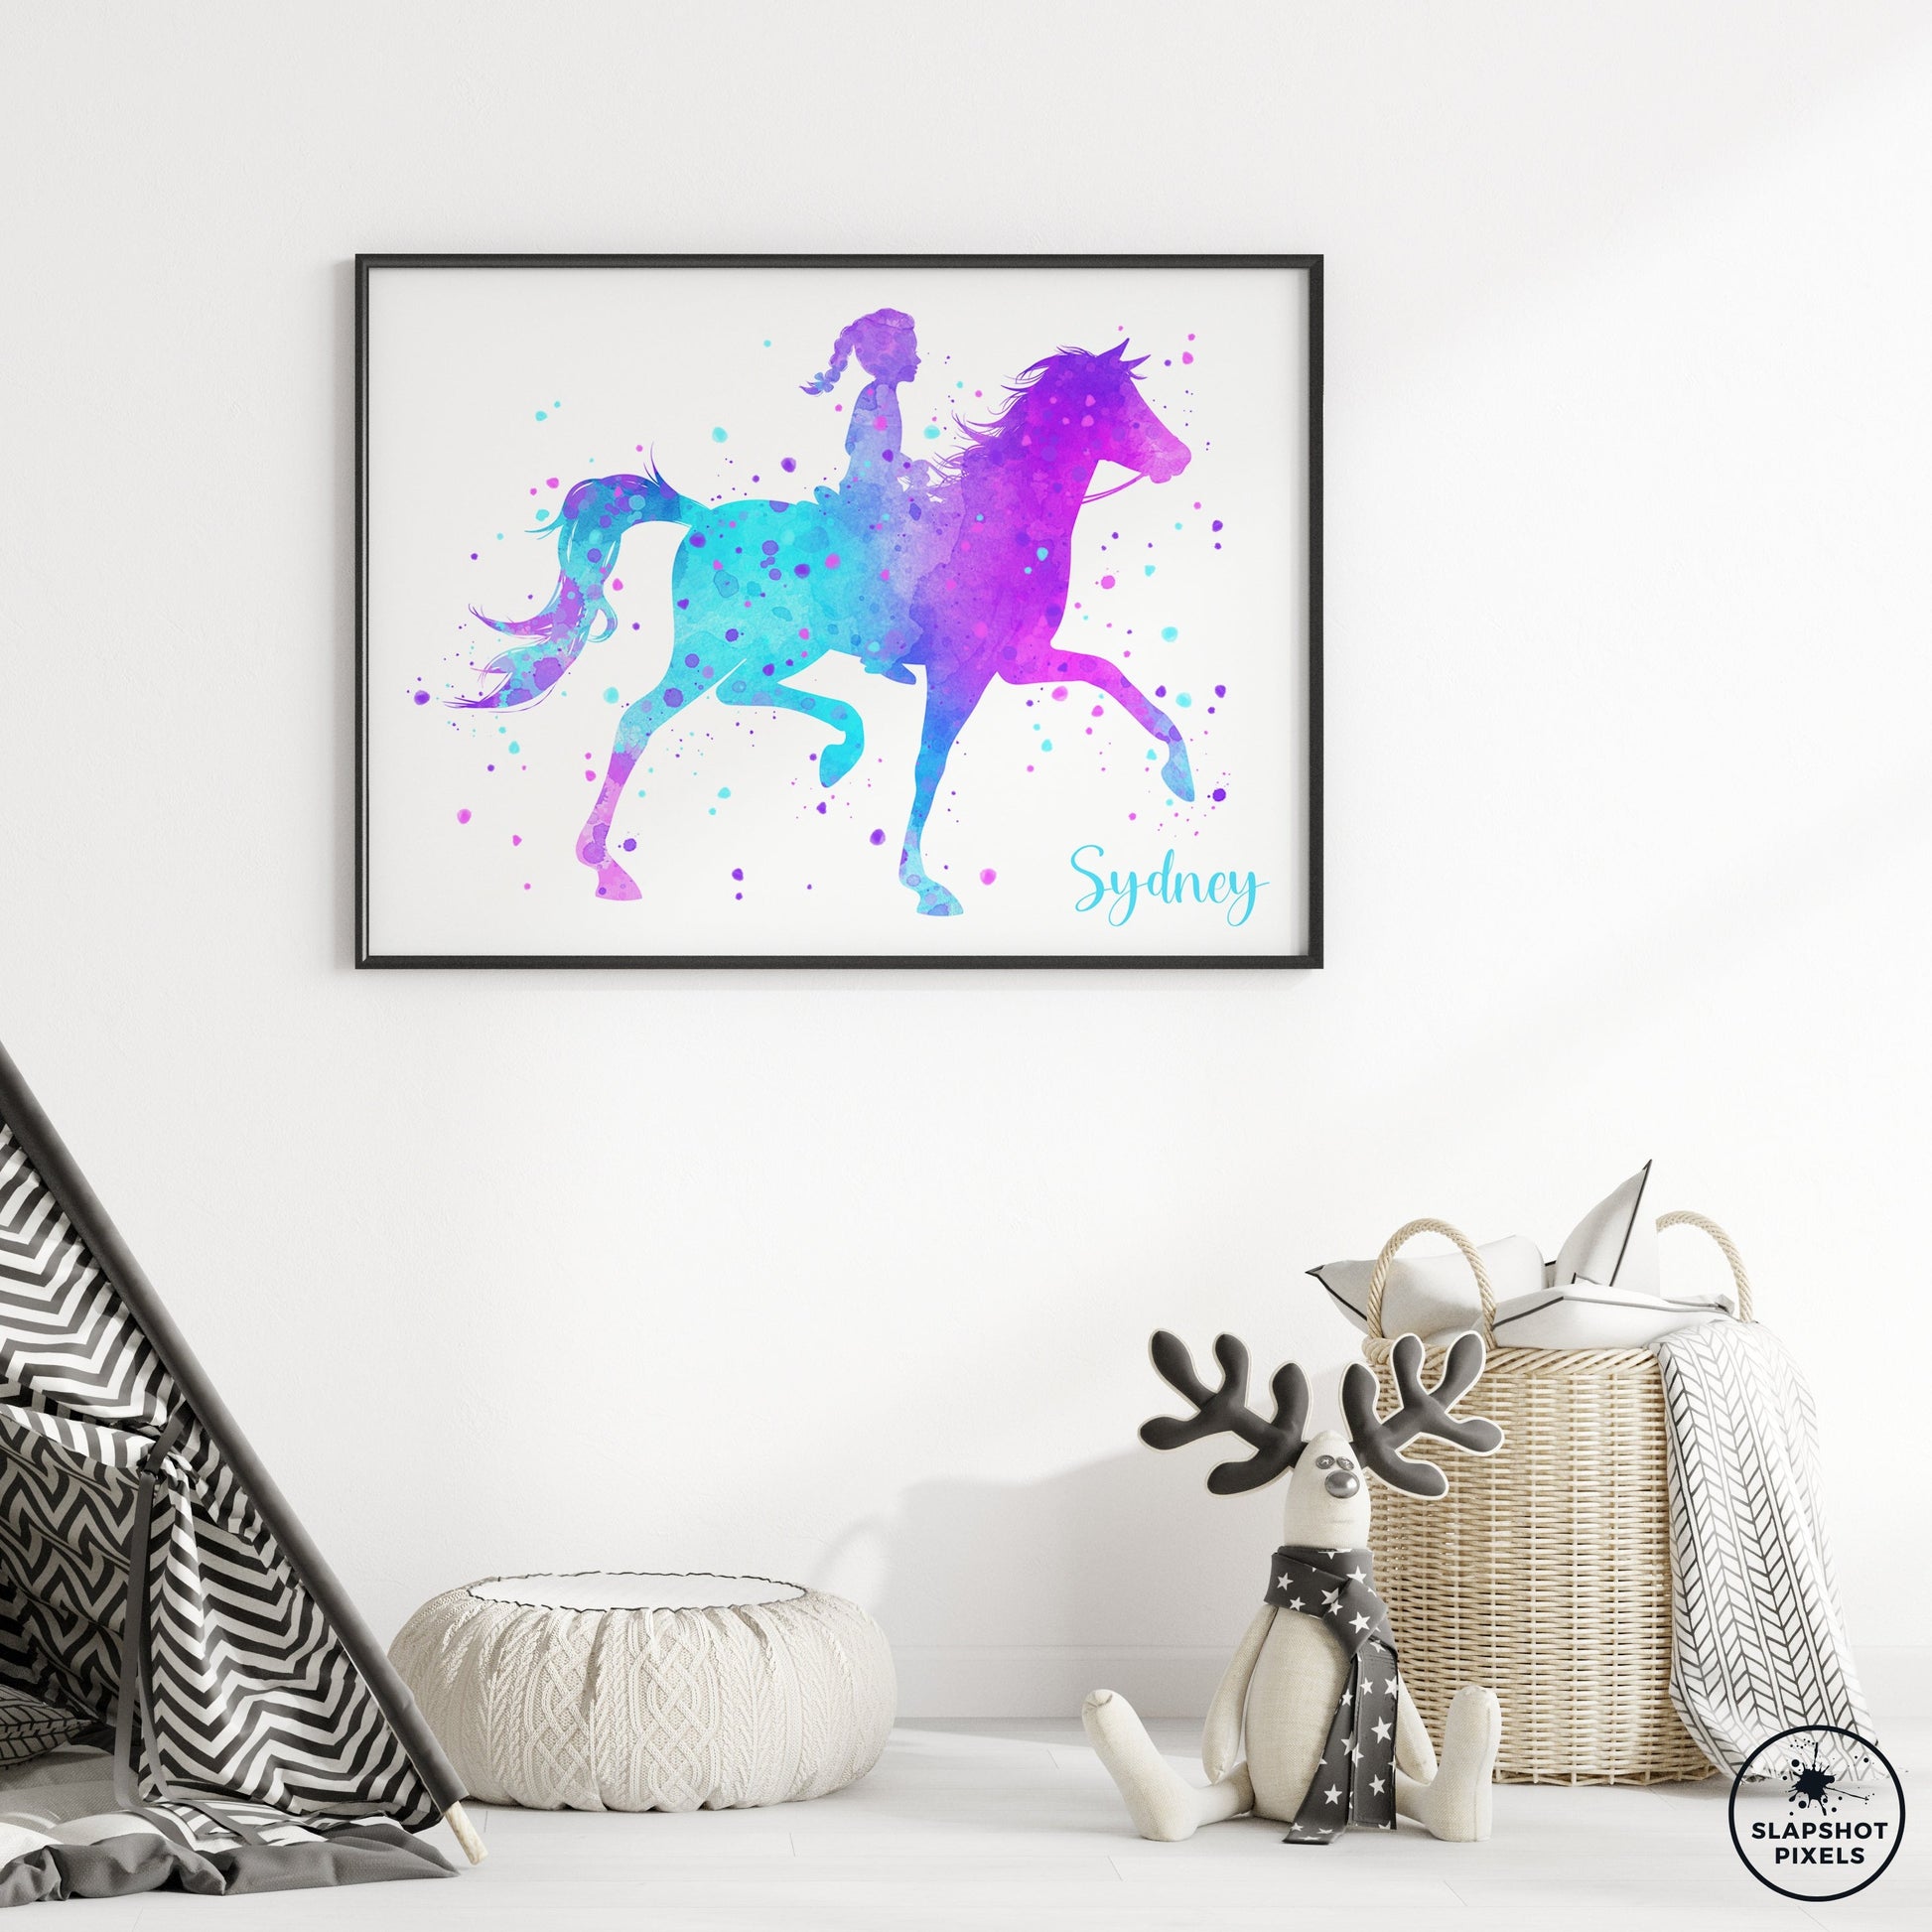 Personalized horseback riding poster showing a girl riding a horse with a custom name. Designed in pink, purple and teal watercolor splatters. Perfect horseback riding gifts for girls, horse prints, horseback riding wall art décor in a girls bedroom and birthday gifts for girls.